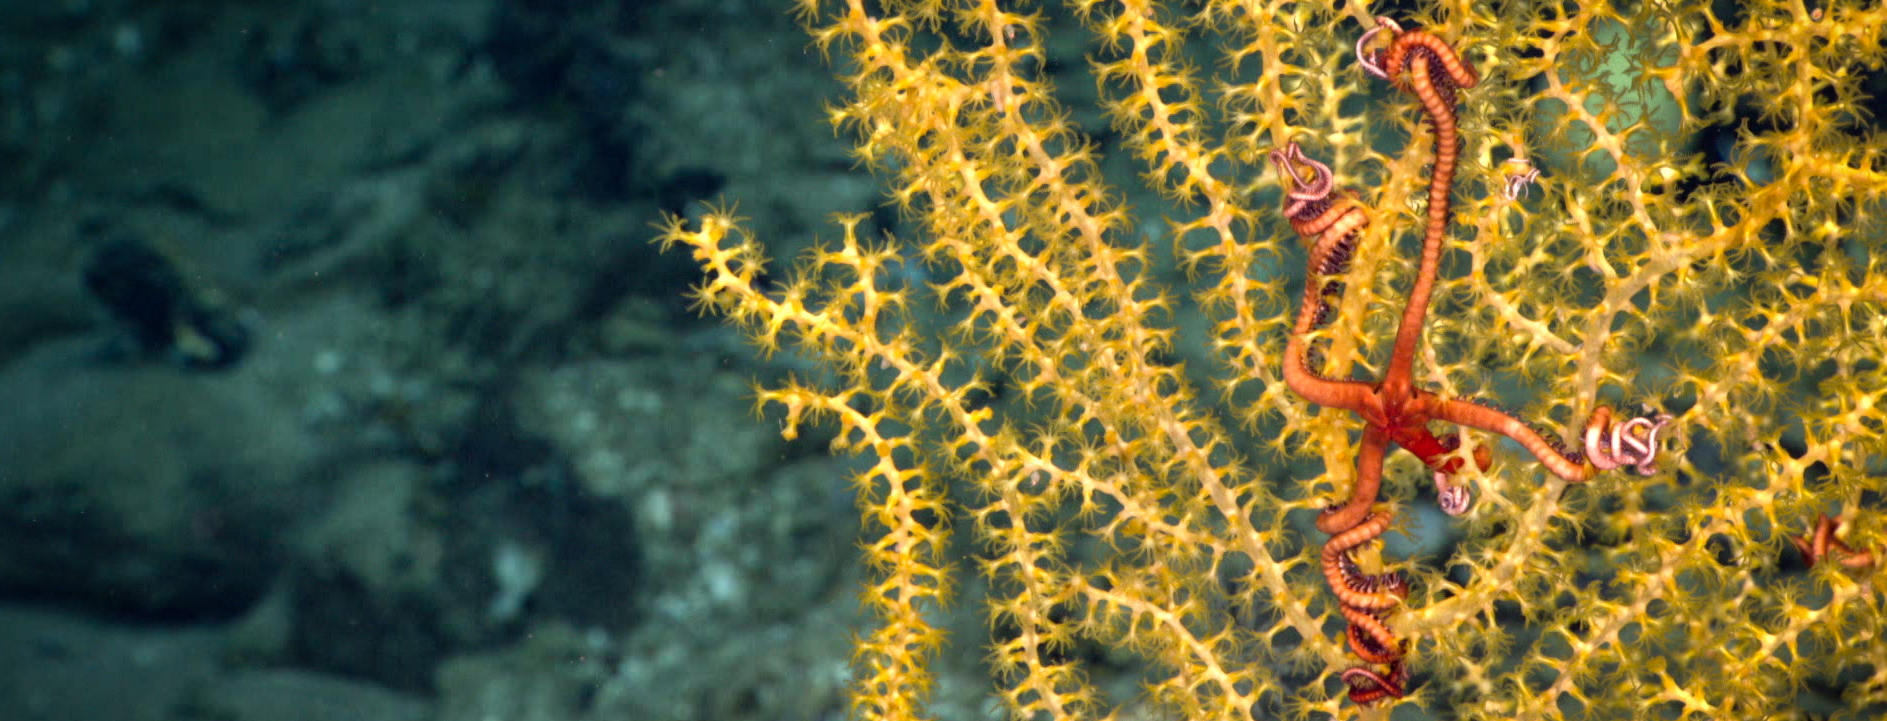 Strengthen the Northeast Canyons & Seamounts Marine Monument